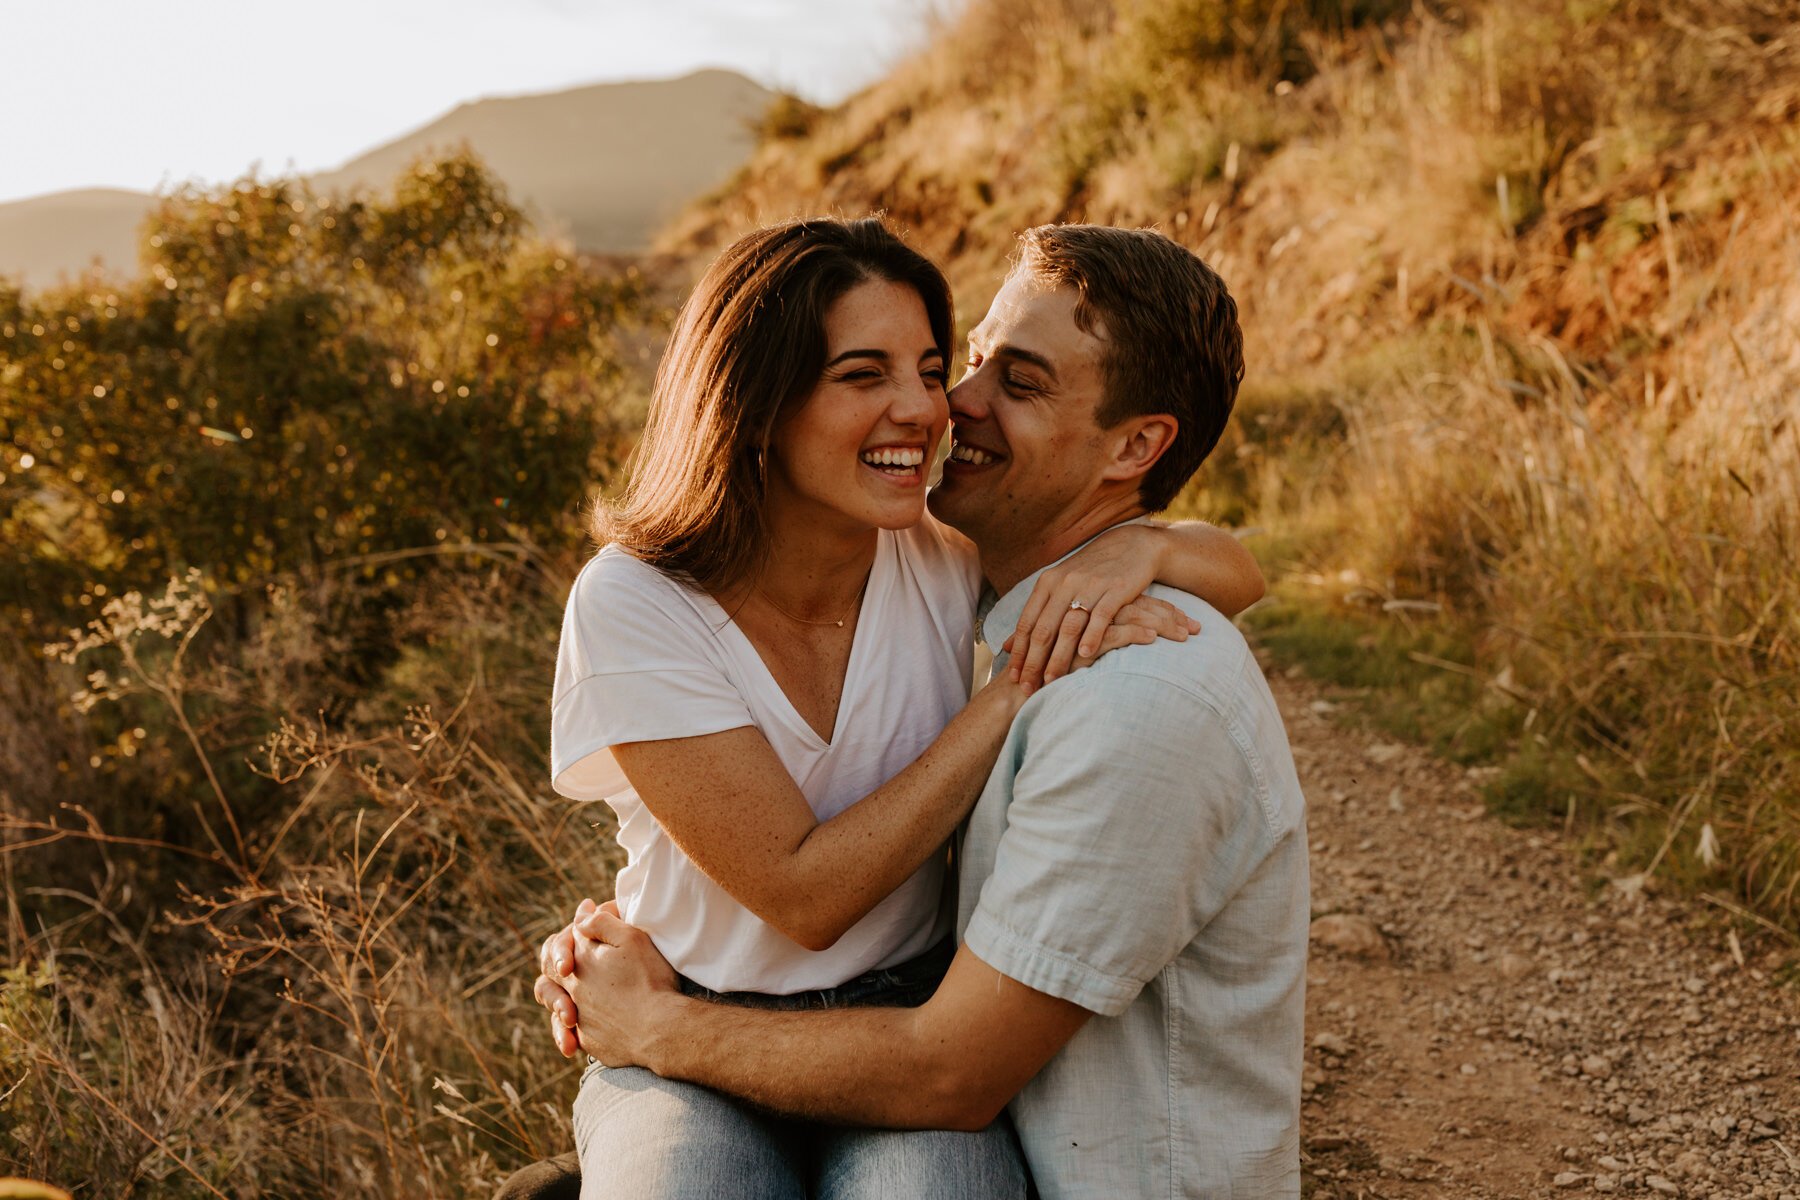 Solstice Canyon engagement session in Malibu, California | Photo by Tida Svy | www.tidasvy.com